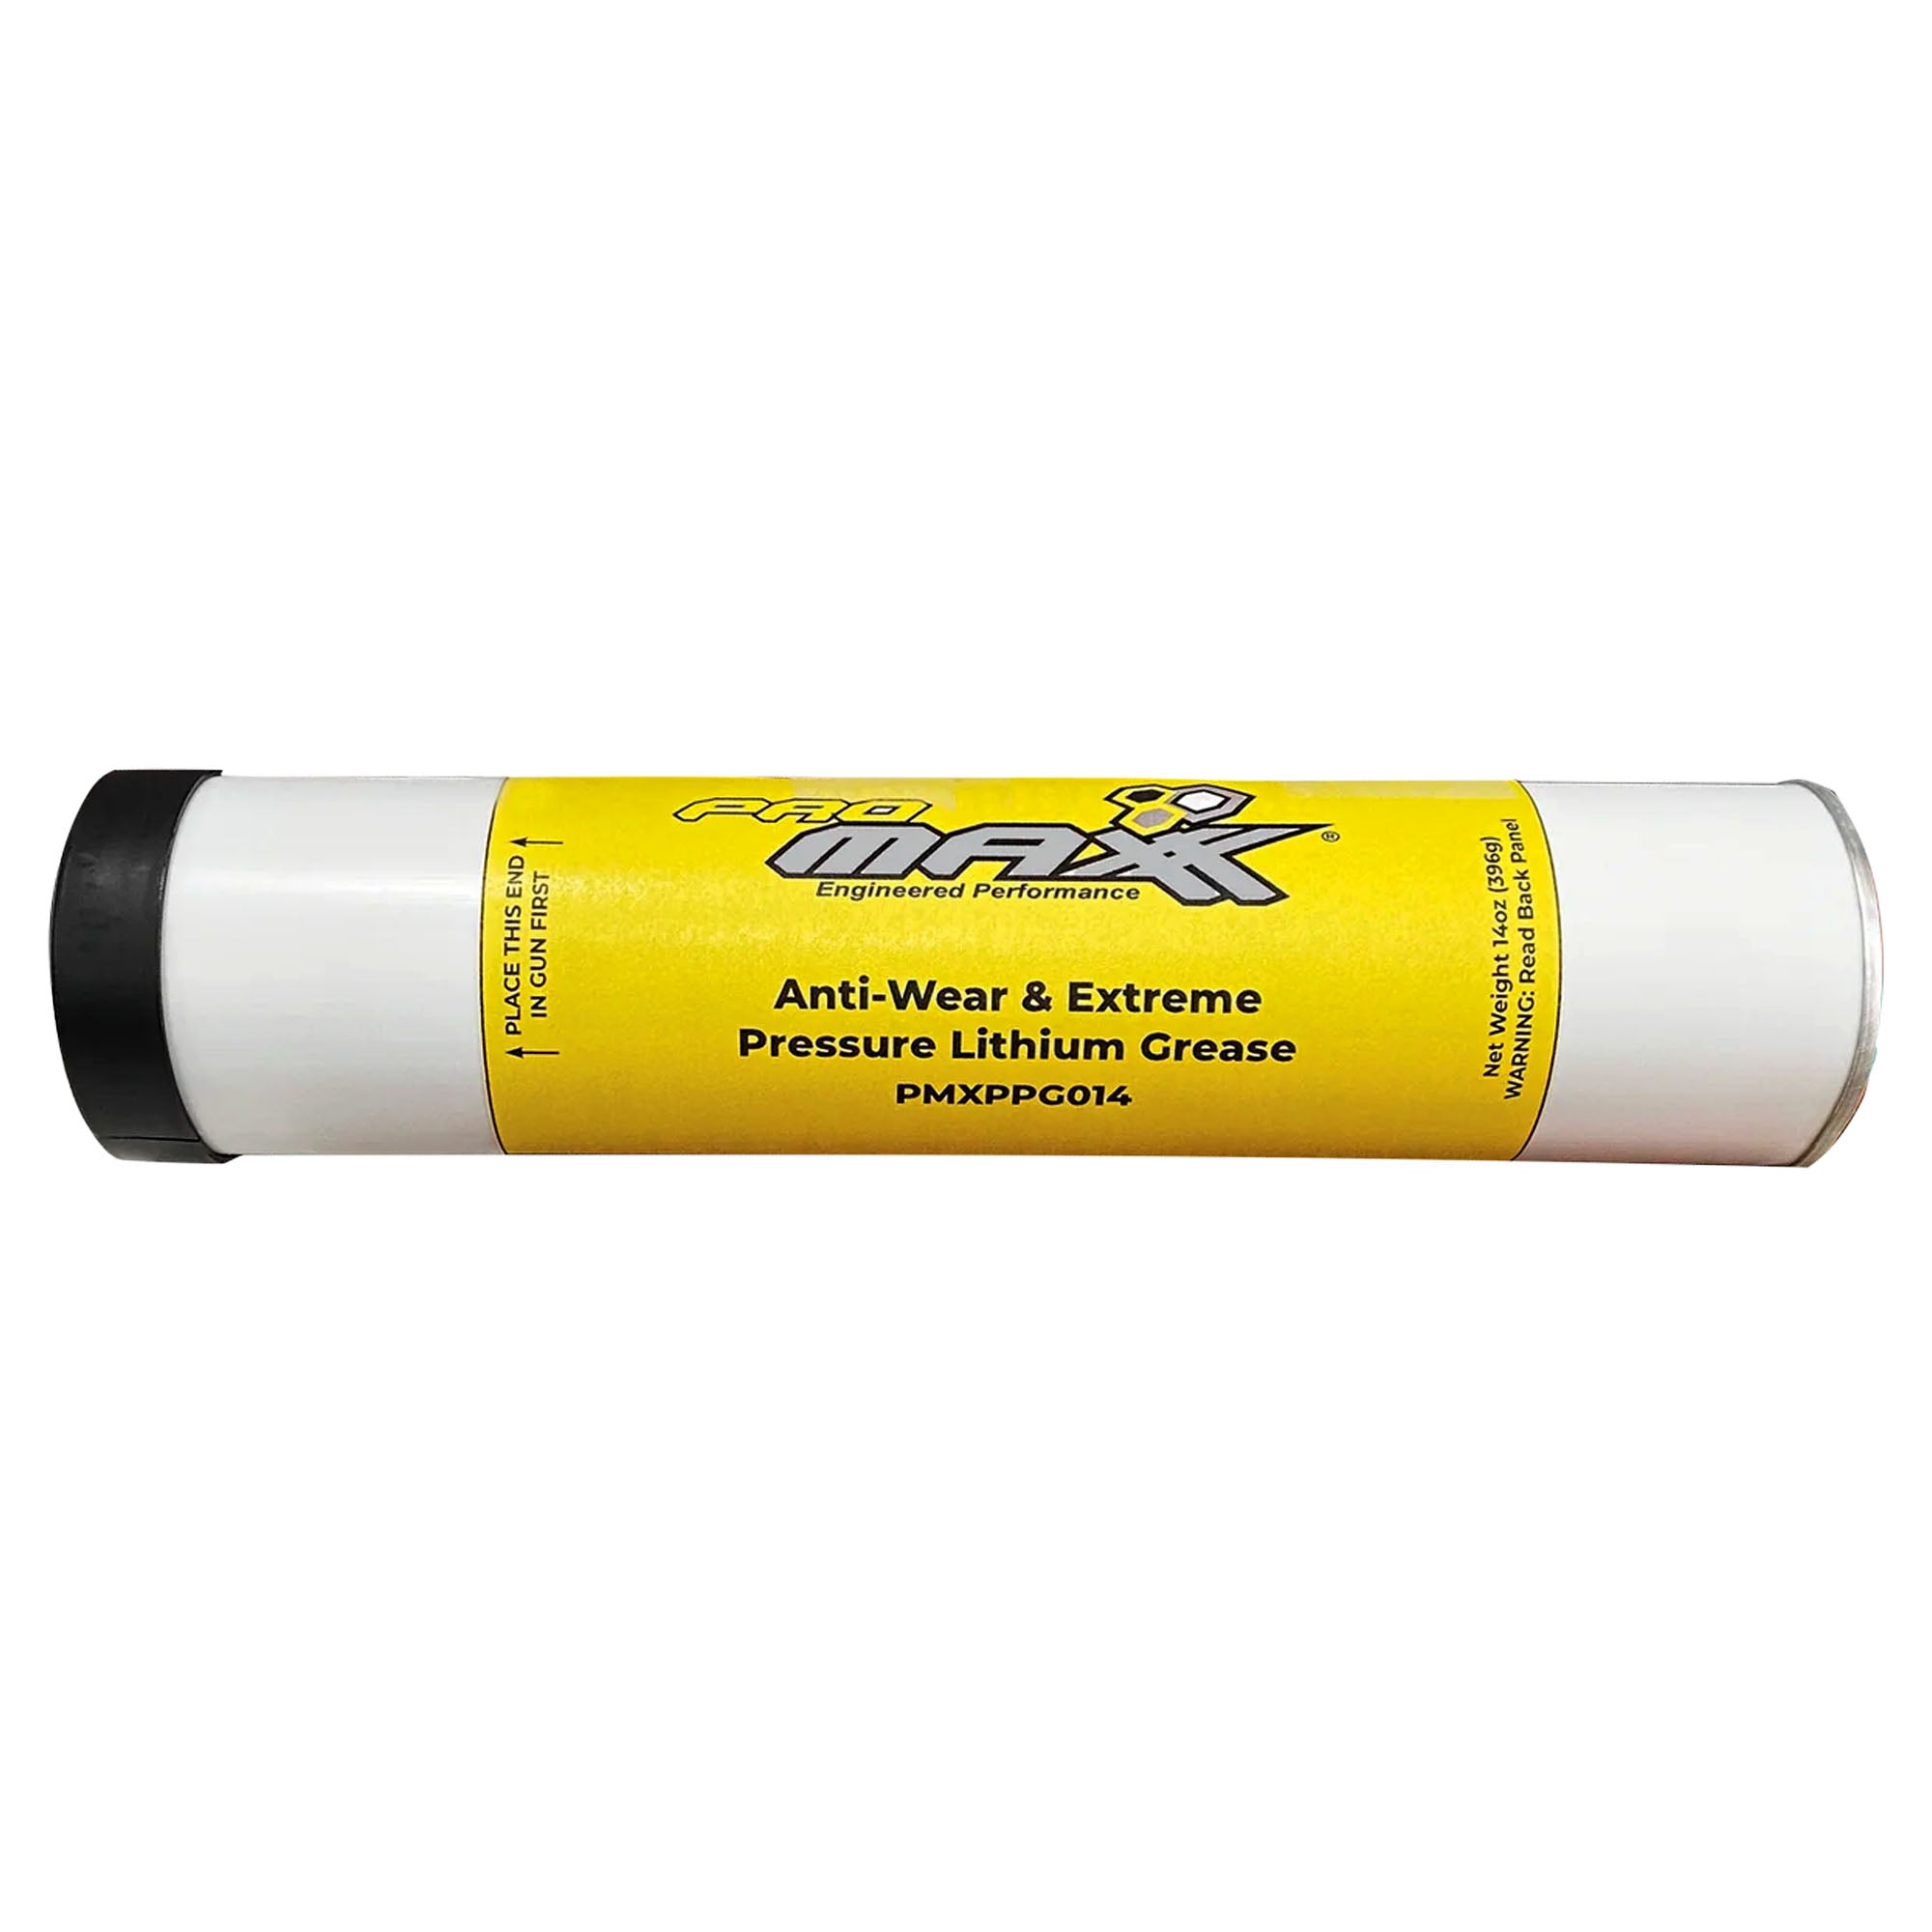 PMXPPG014 Tommy Extreme Pressure Grease 14oz Tube